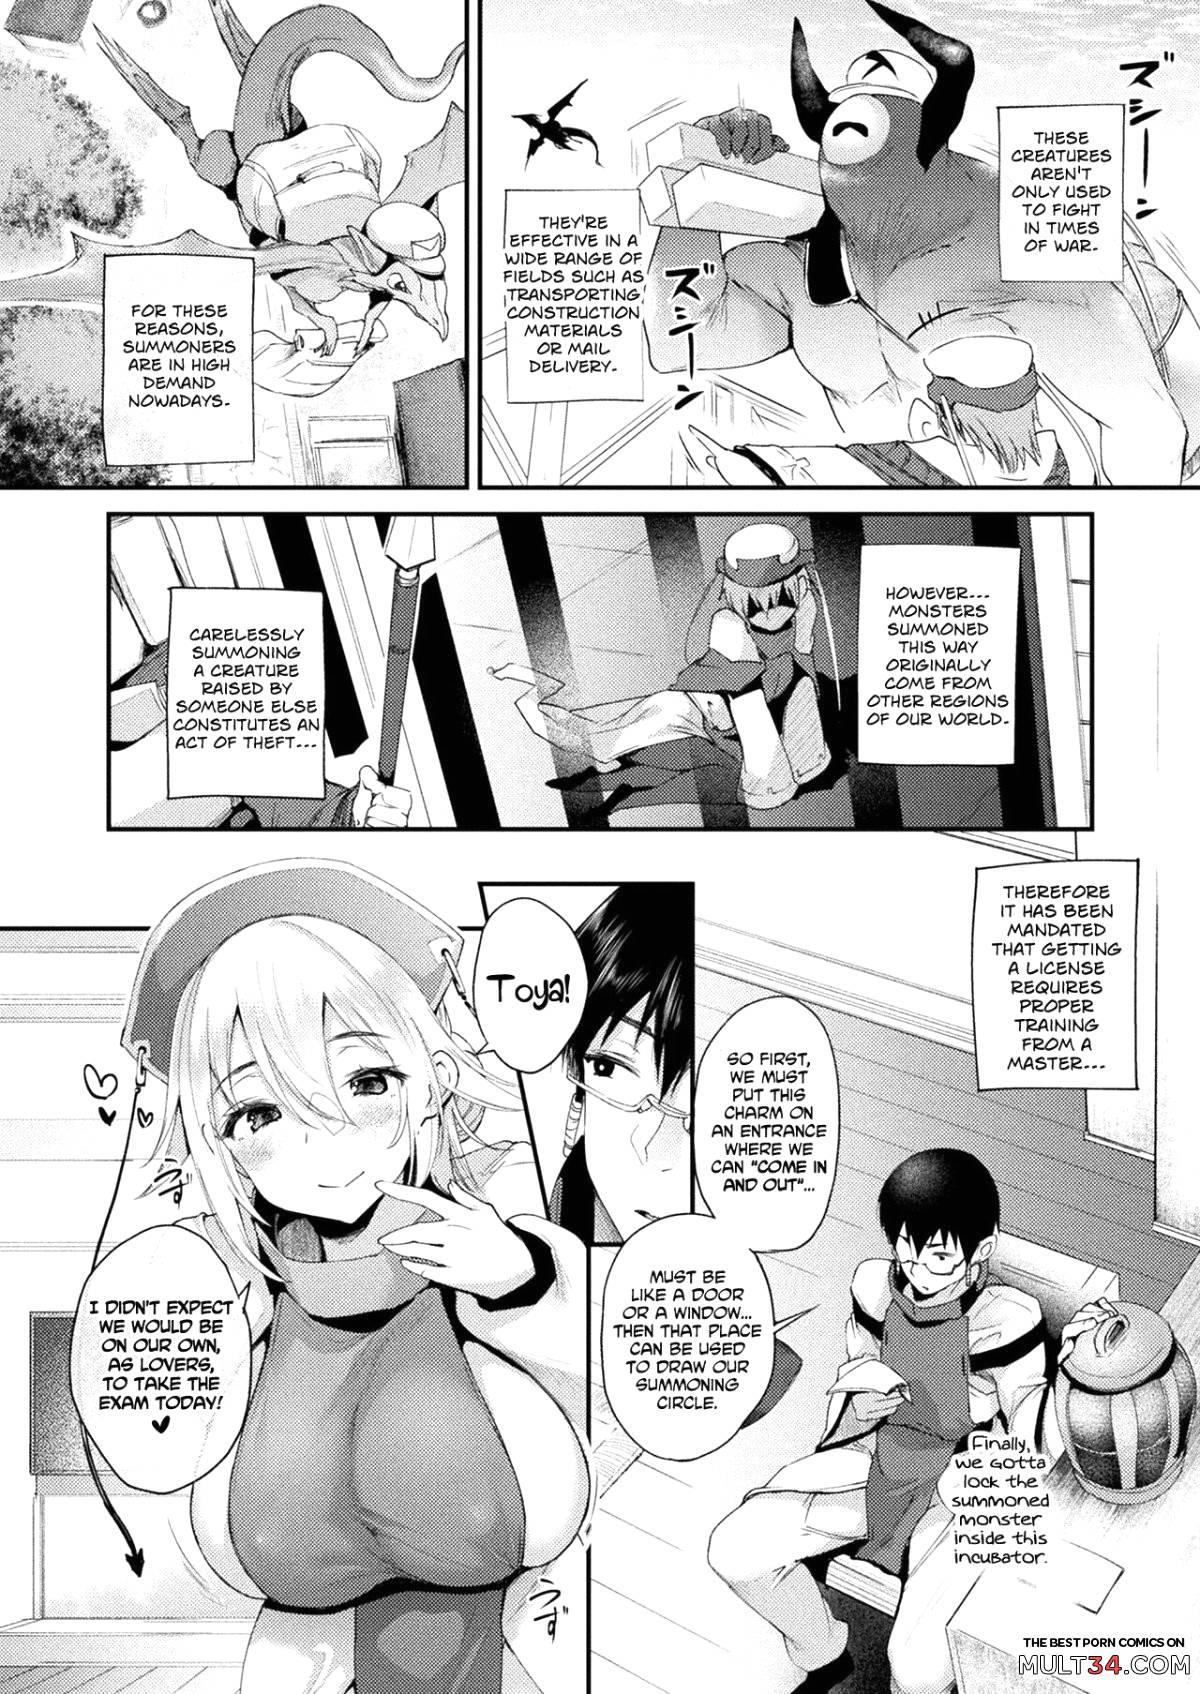 Let's attempt the entry test of the high tier job! page 2